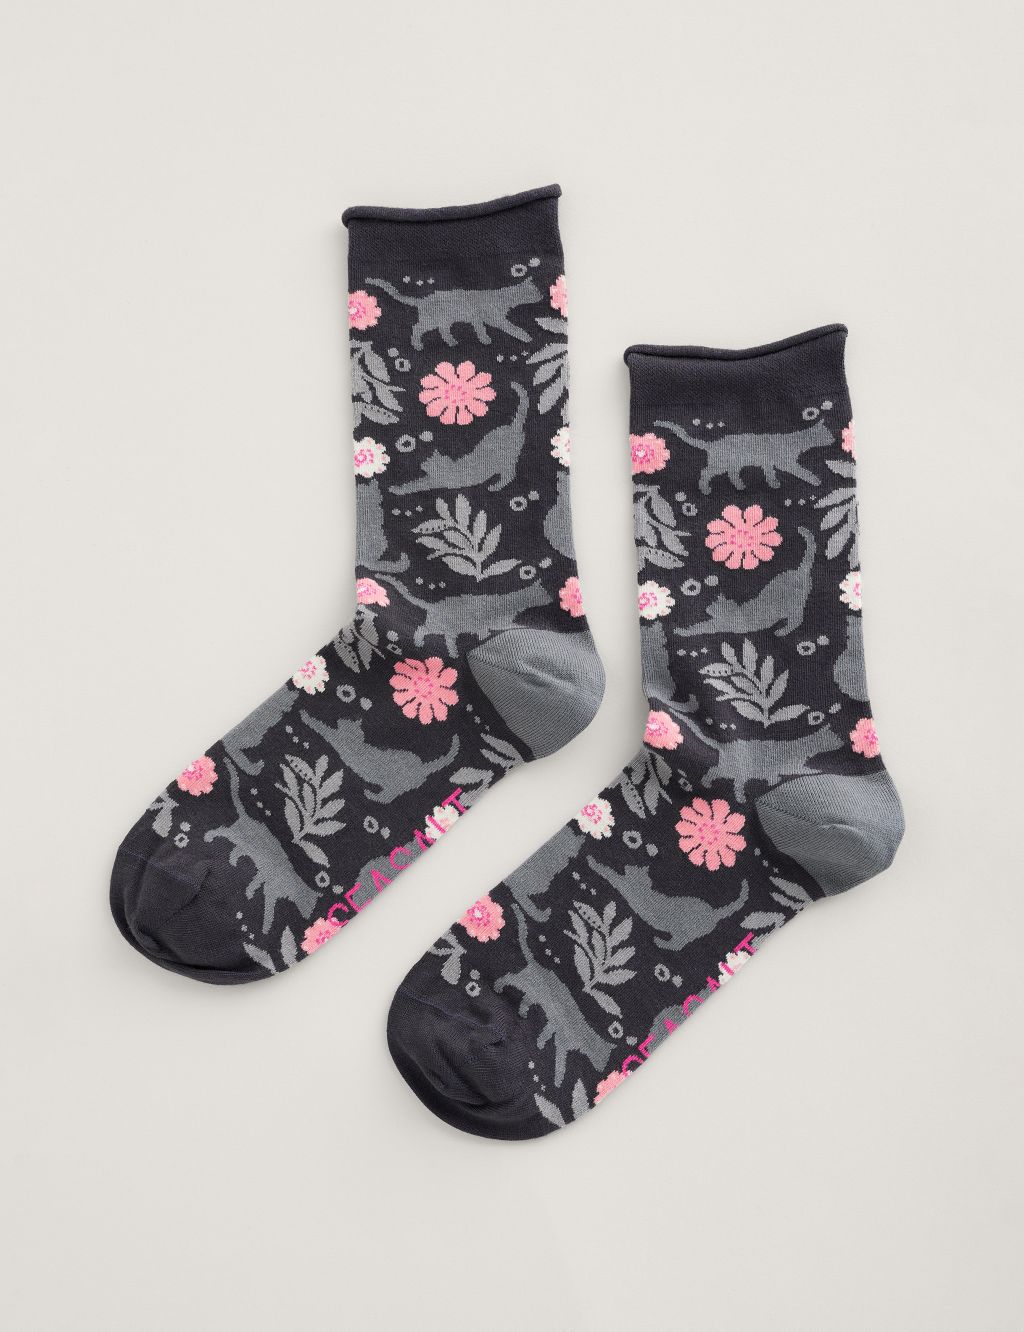 Cat and Floral Ankle High Socks image 1